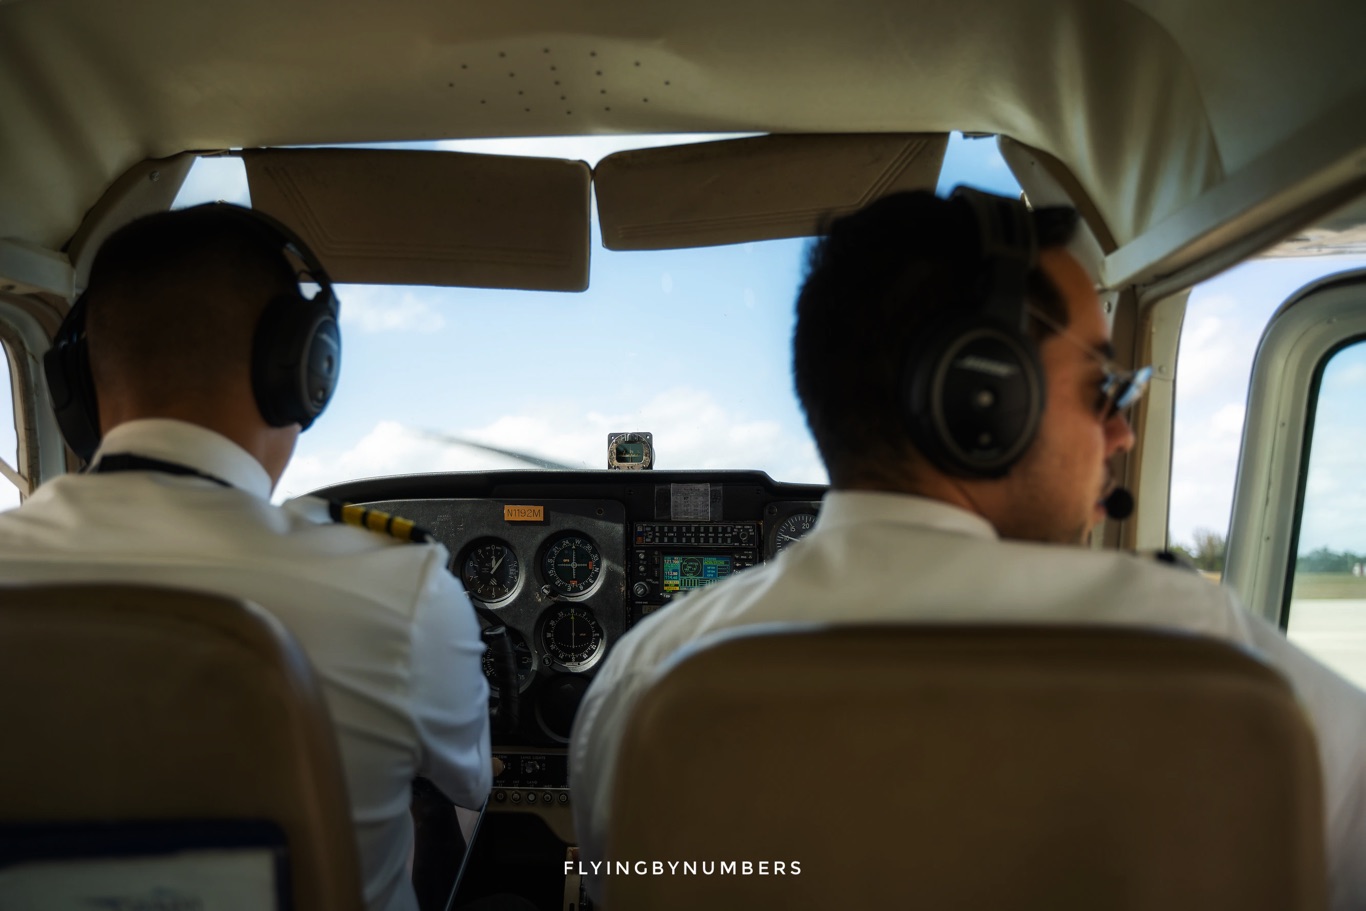 trainee pilots fly a single engined piston